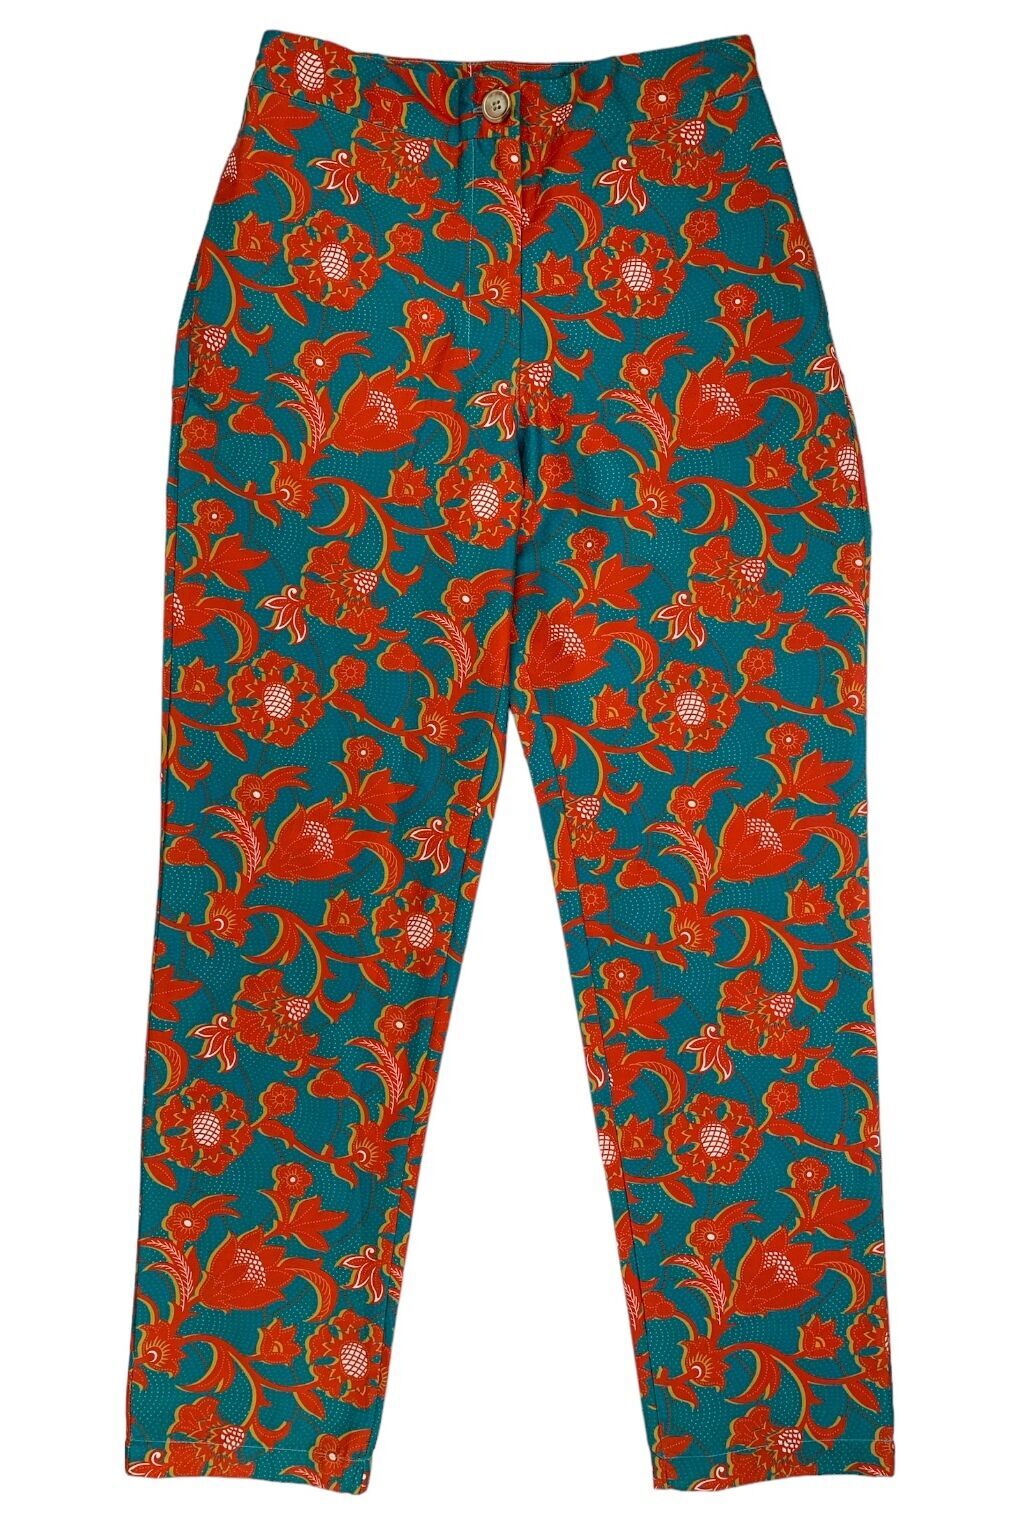 AFRICAN FLORAL PANTS